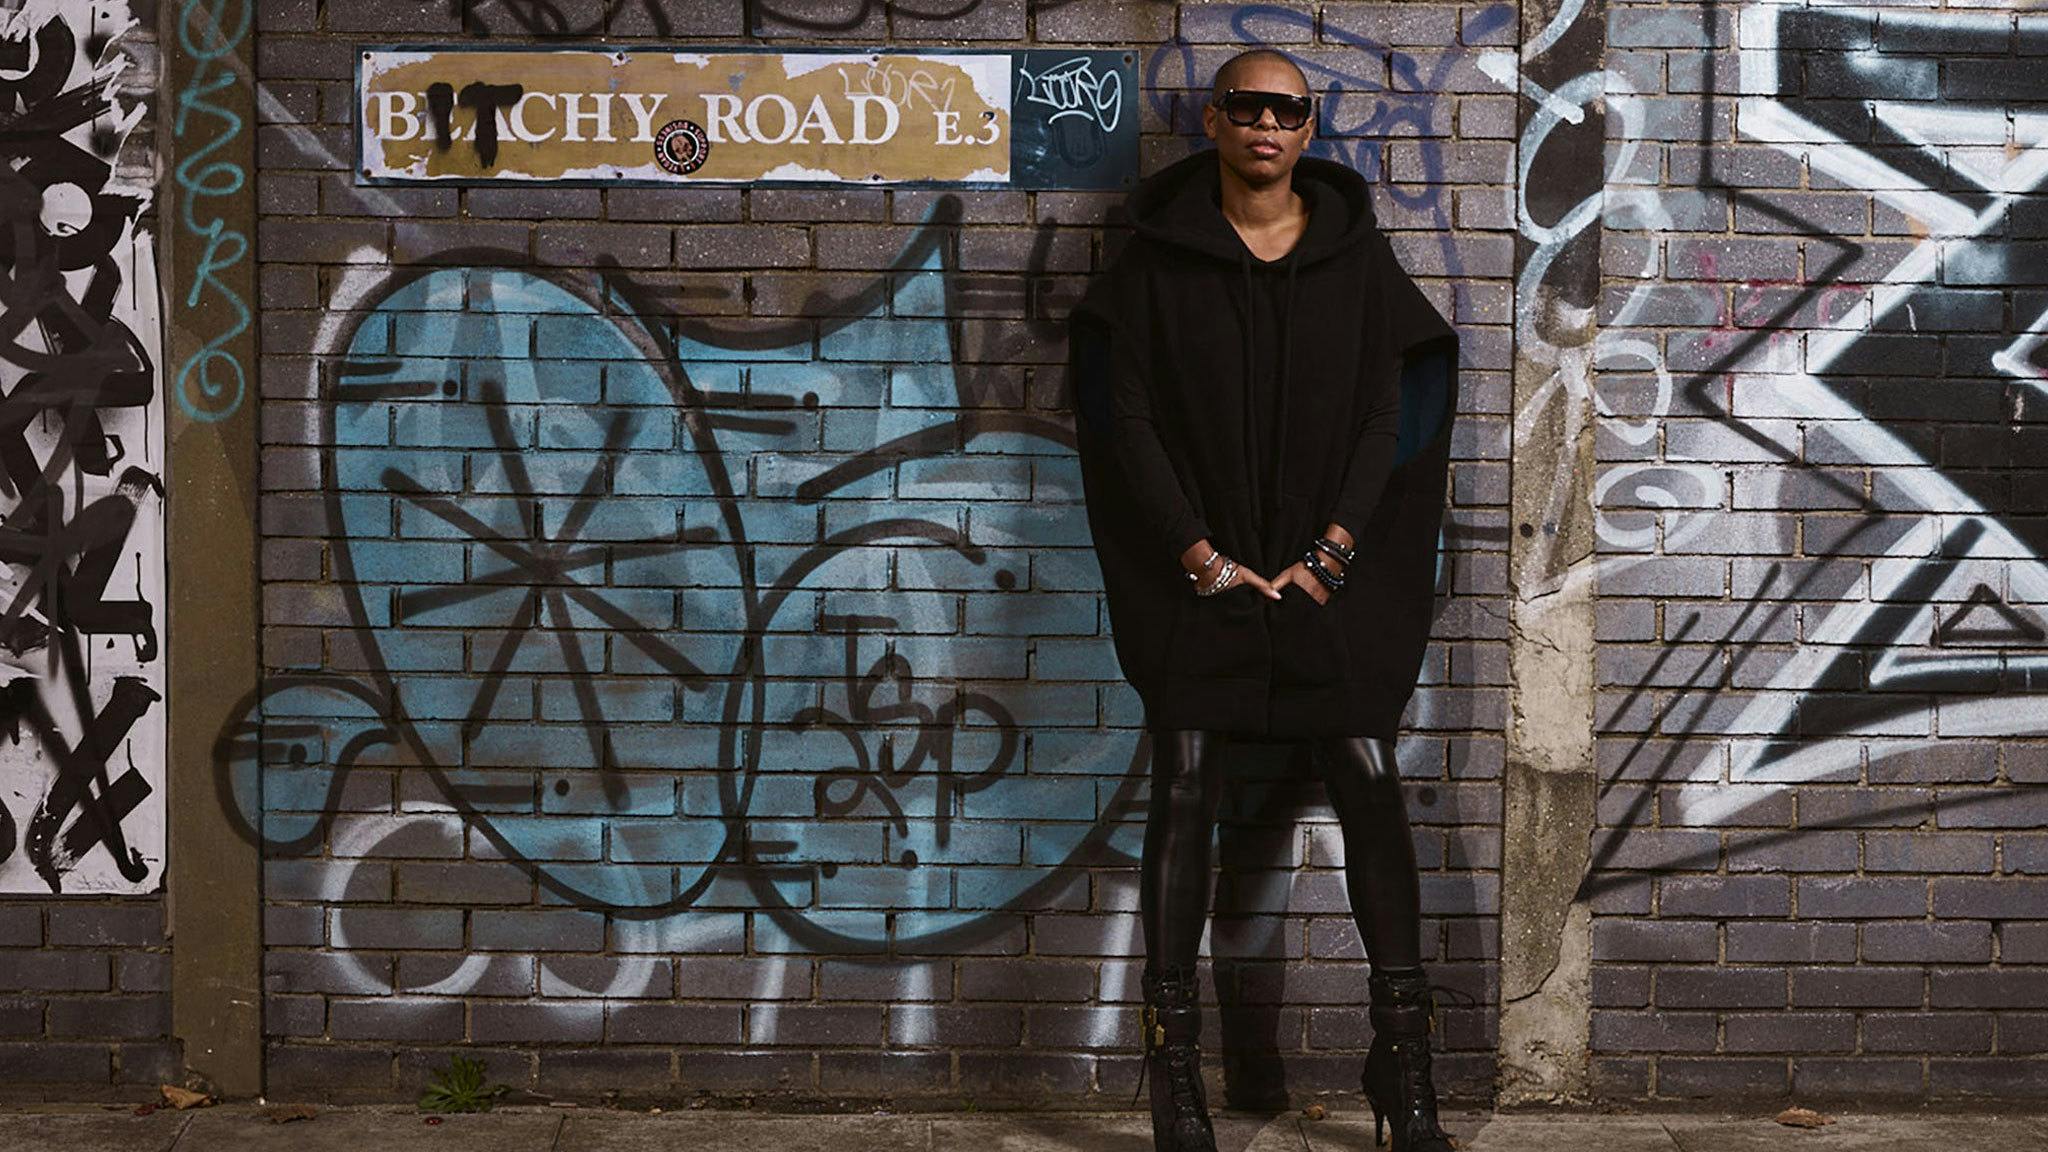 Skunk Anansie’s Skin: “You don’t have to be nice. Be a c**t if that’s who you are”